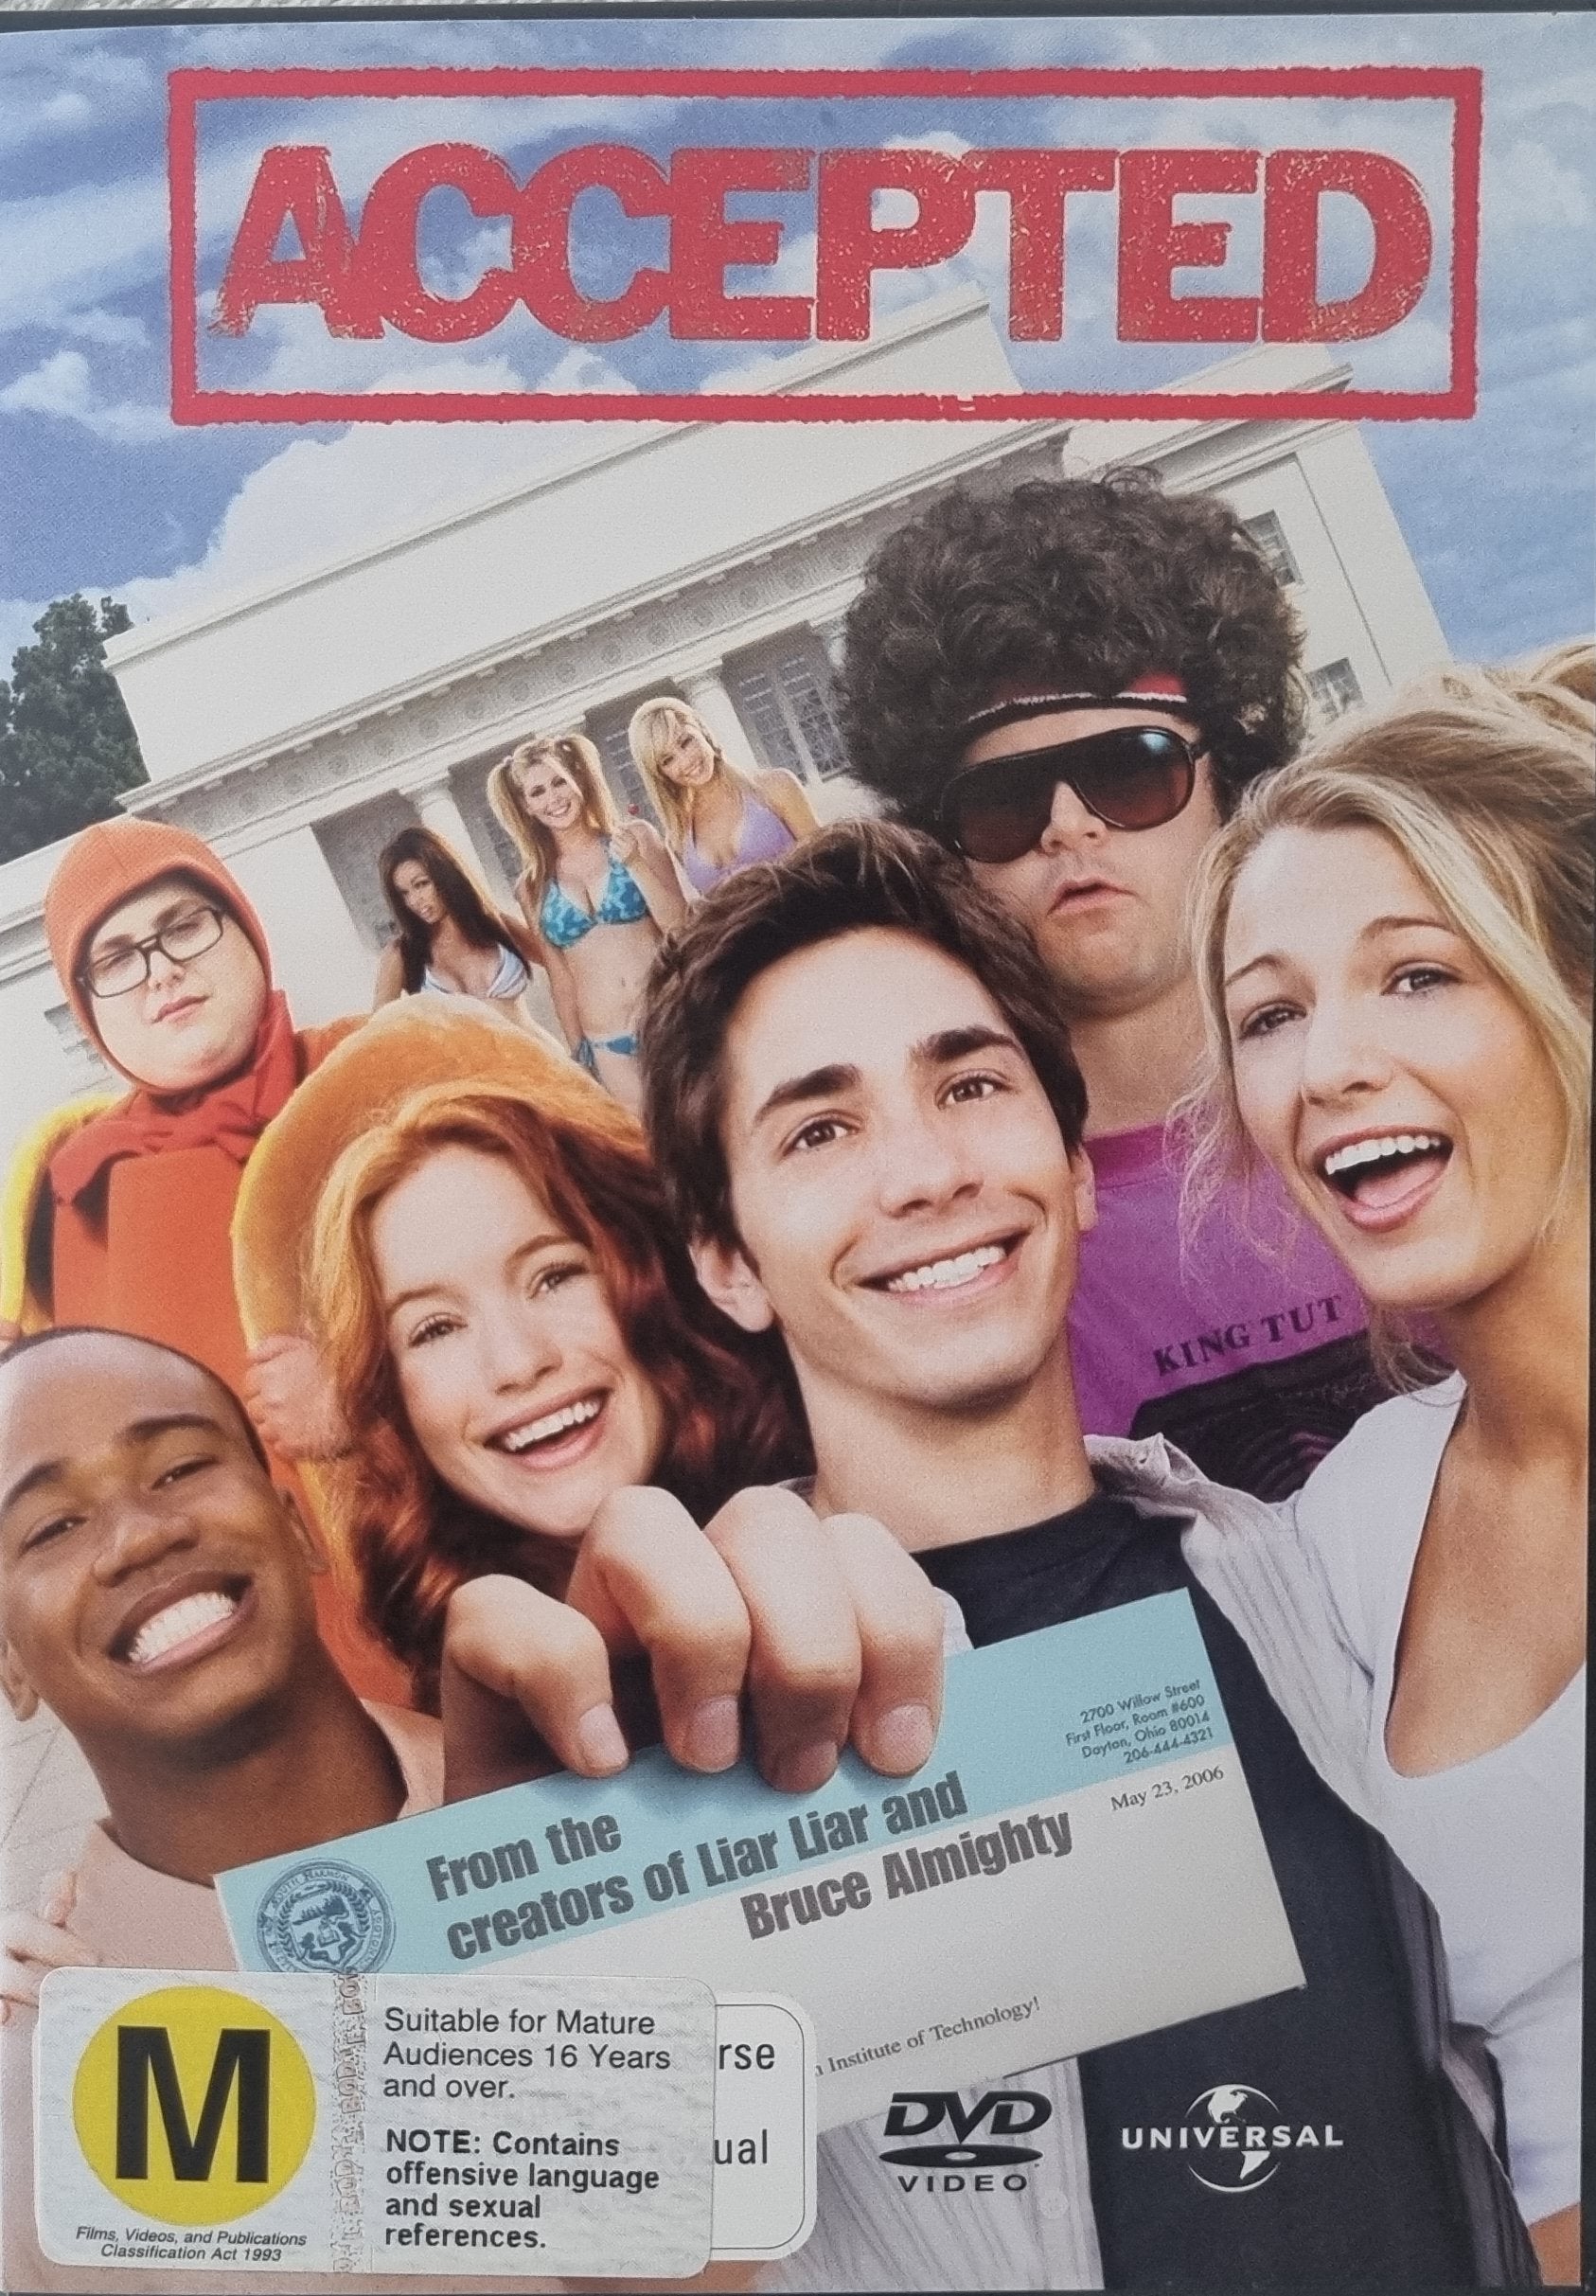 Accepted (DVD)